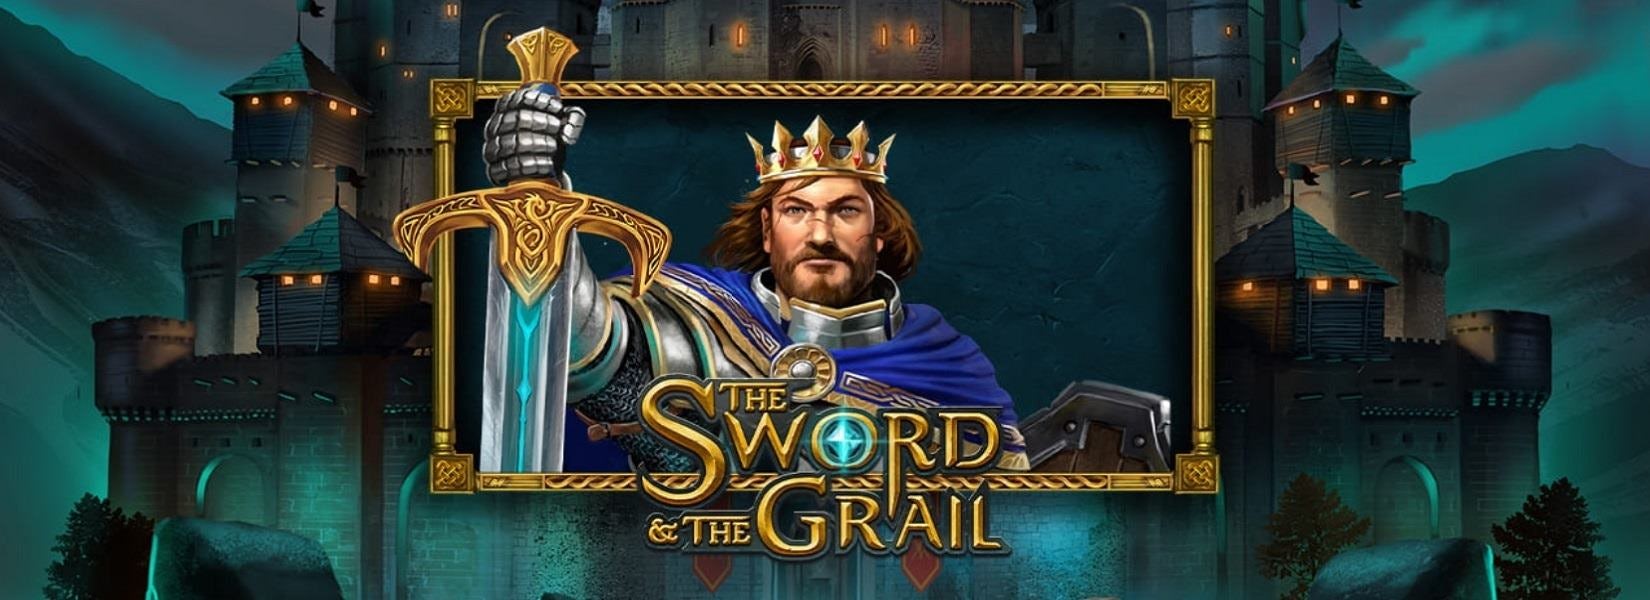 the-sword-and-the-grail-header-1650x600